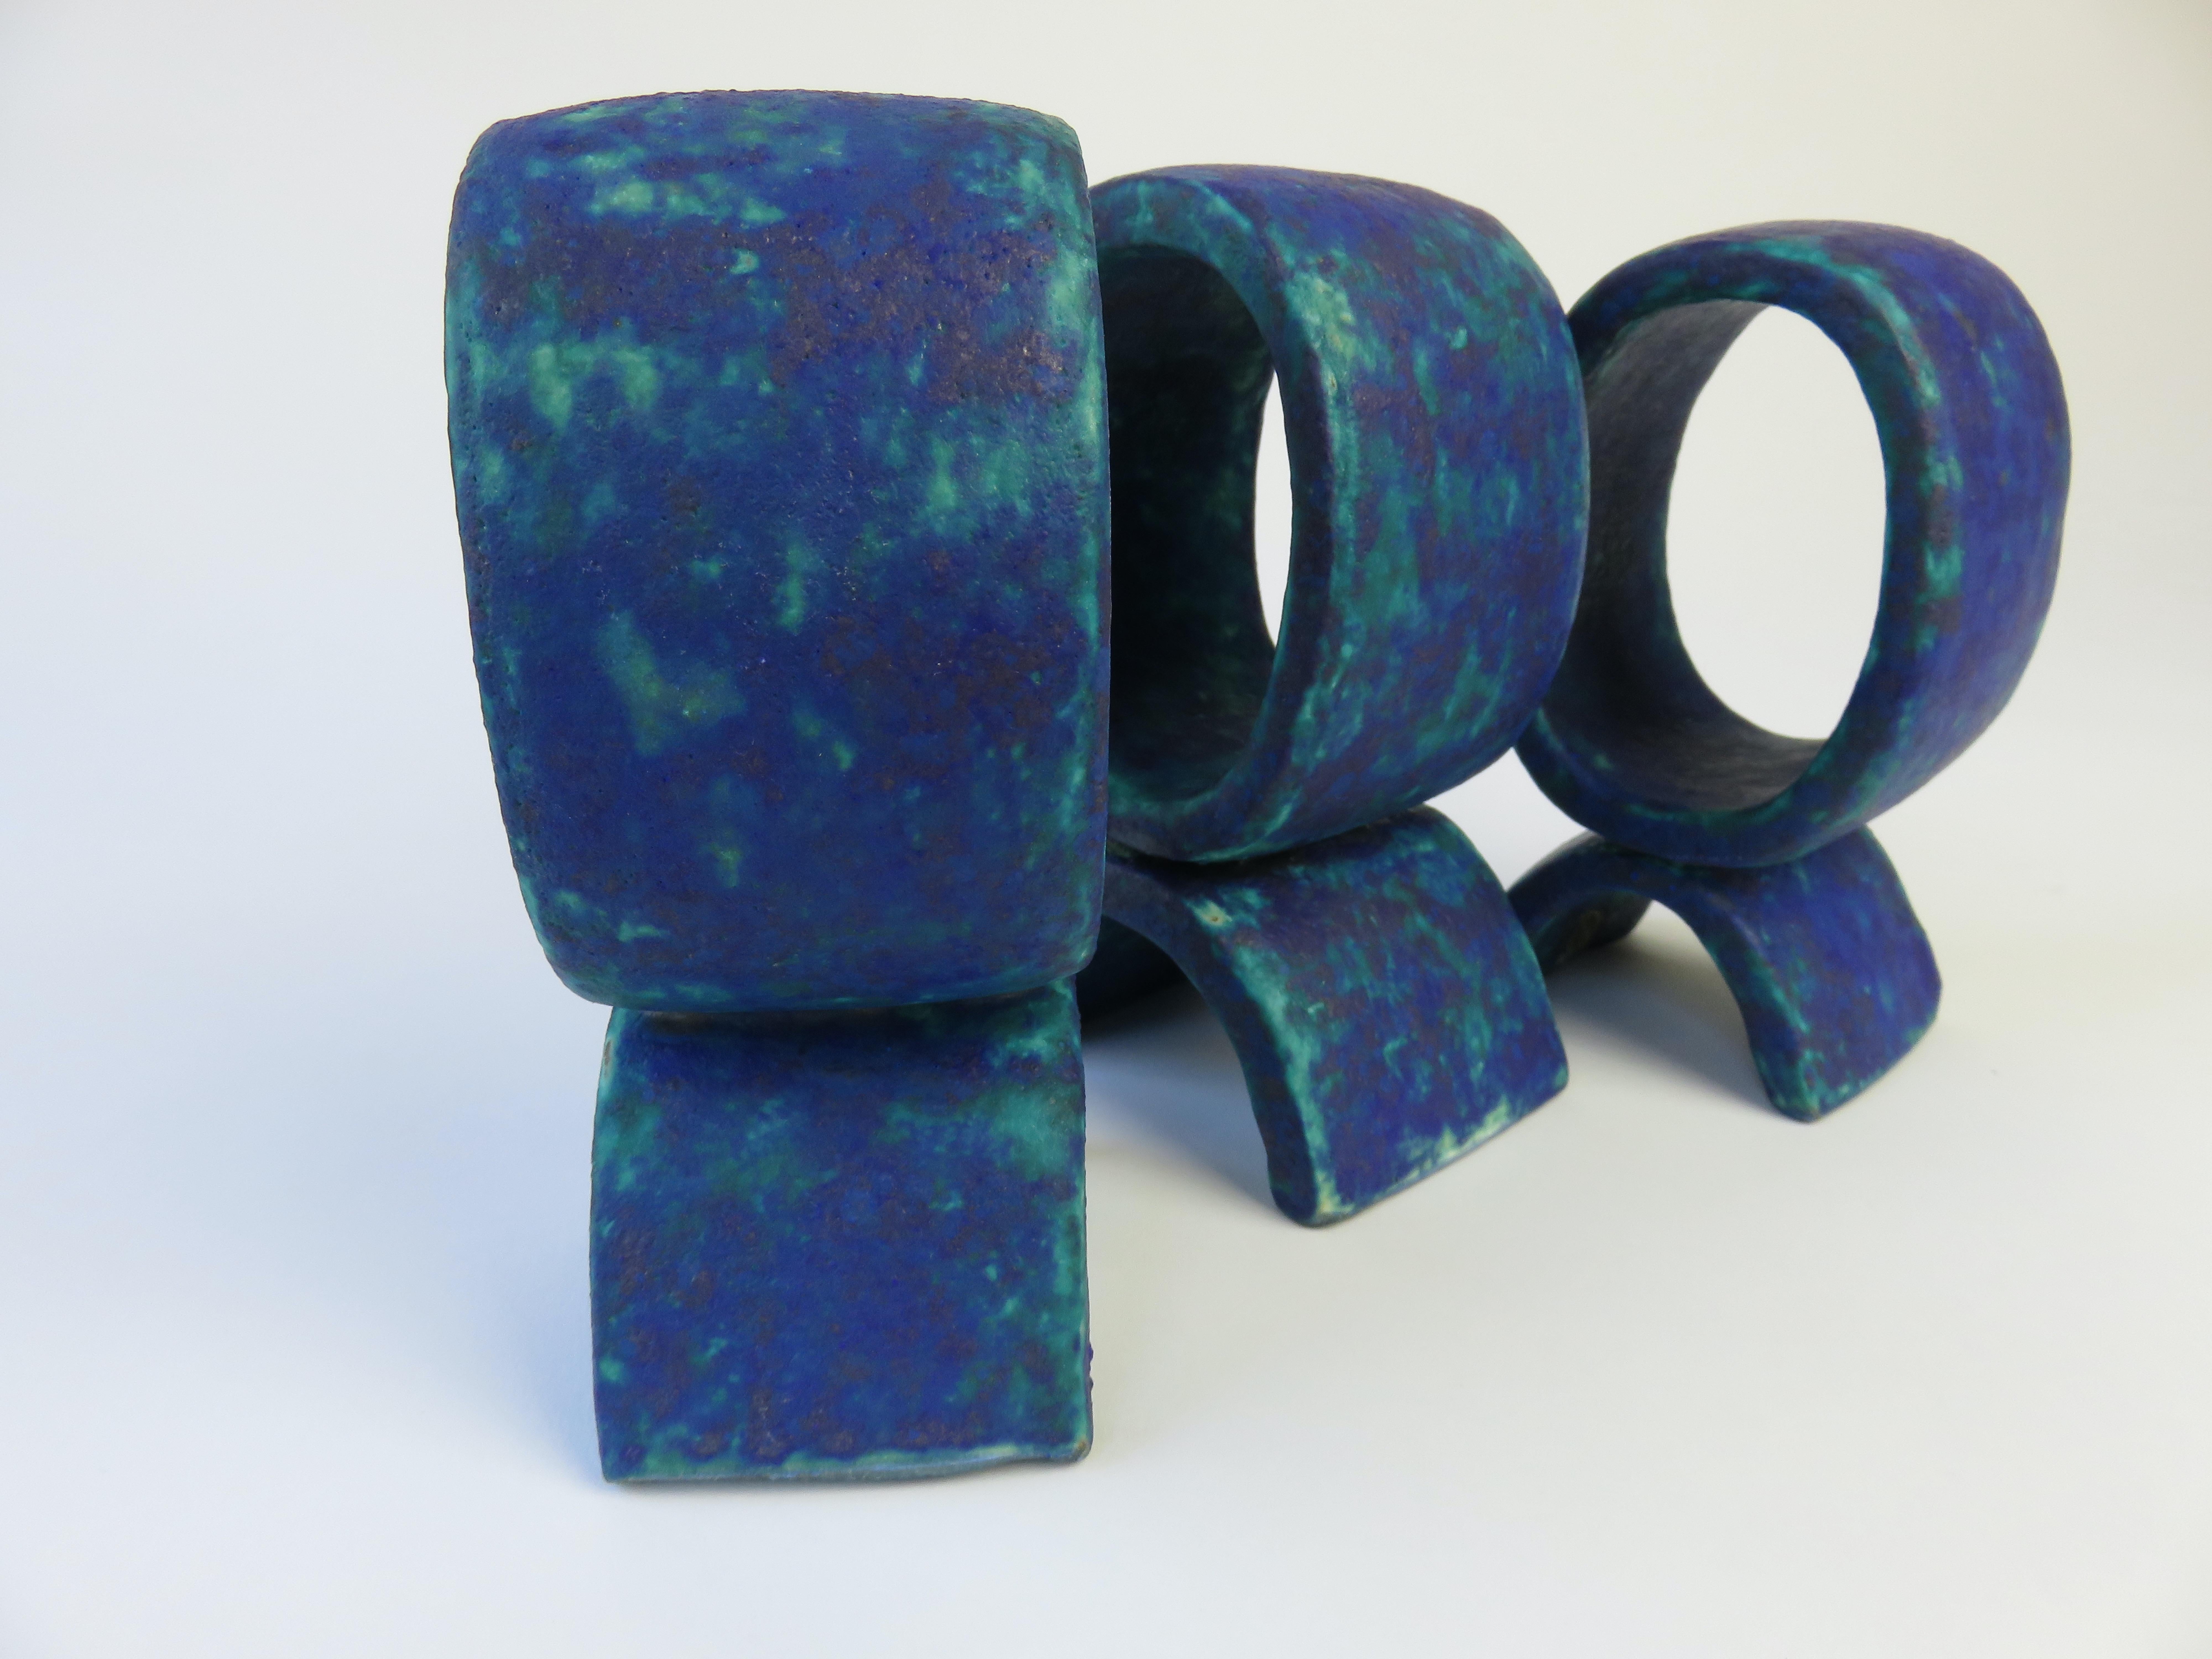 Mottled Turquoise and Deep Blue, 3 Ceramic Totems, Single Rings on Curved Legs For Sale 7